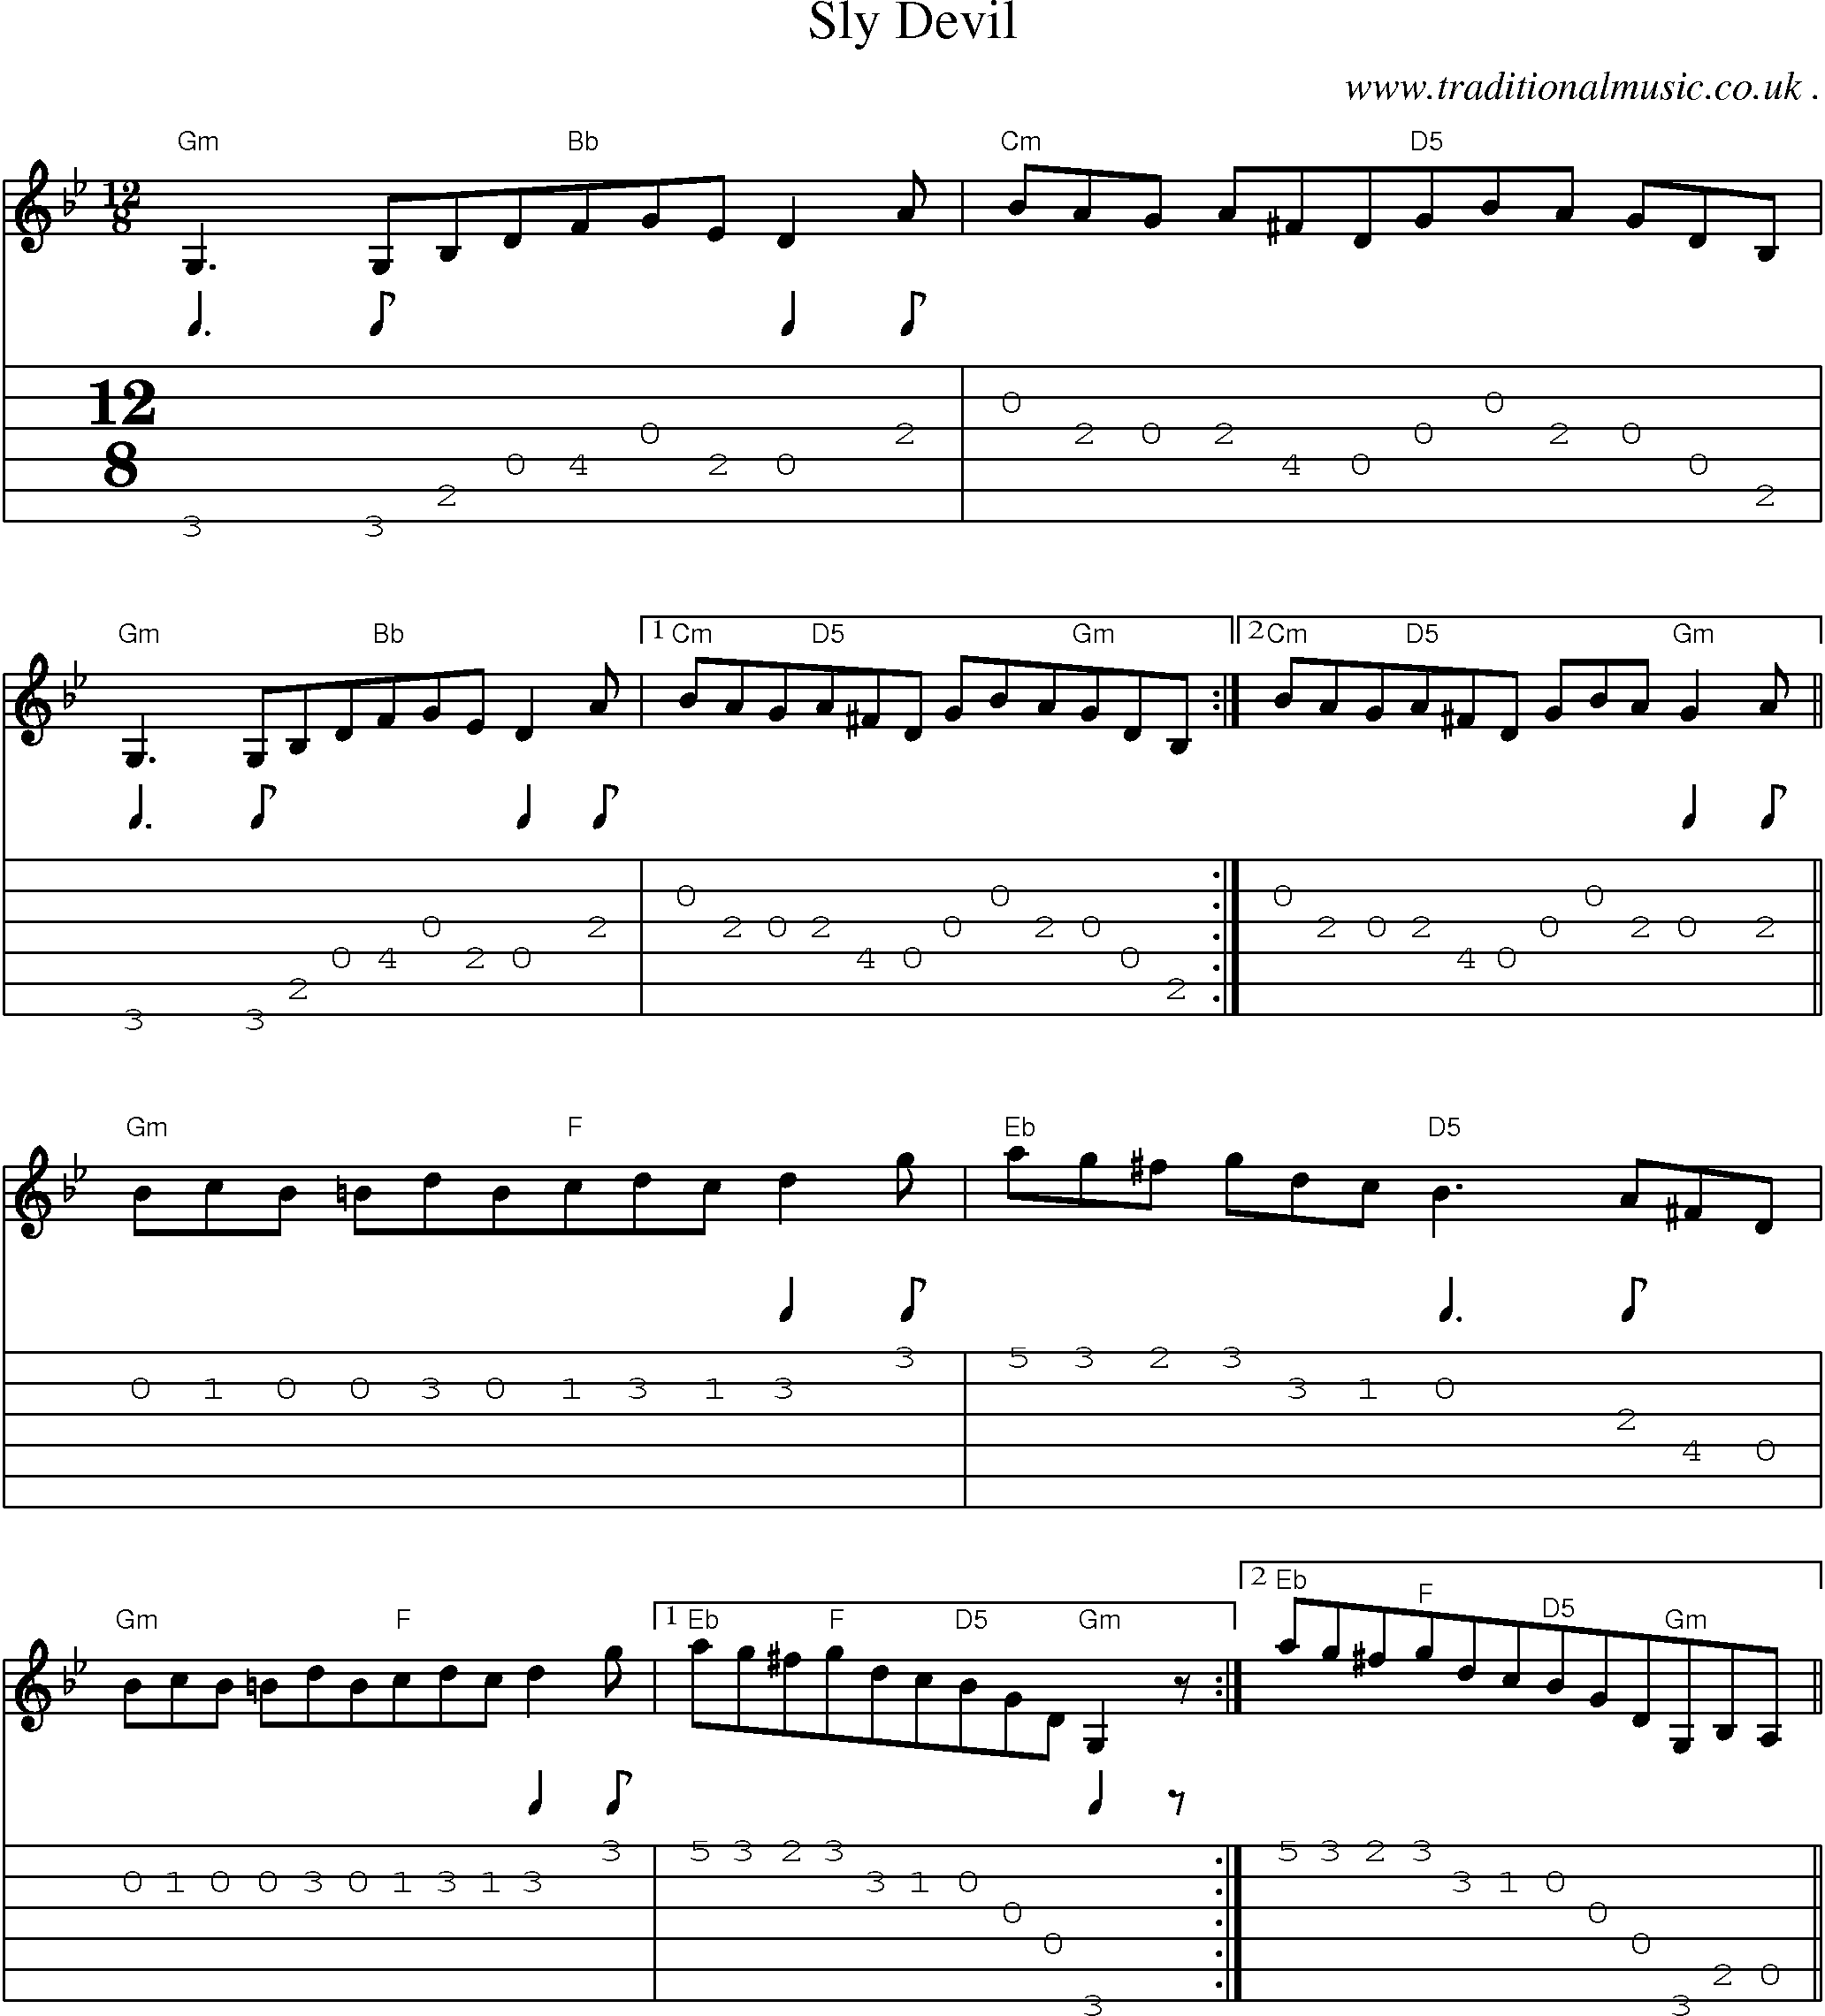 Sheet-Music and Guitar Tabs for Sly Devil